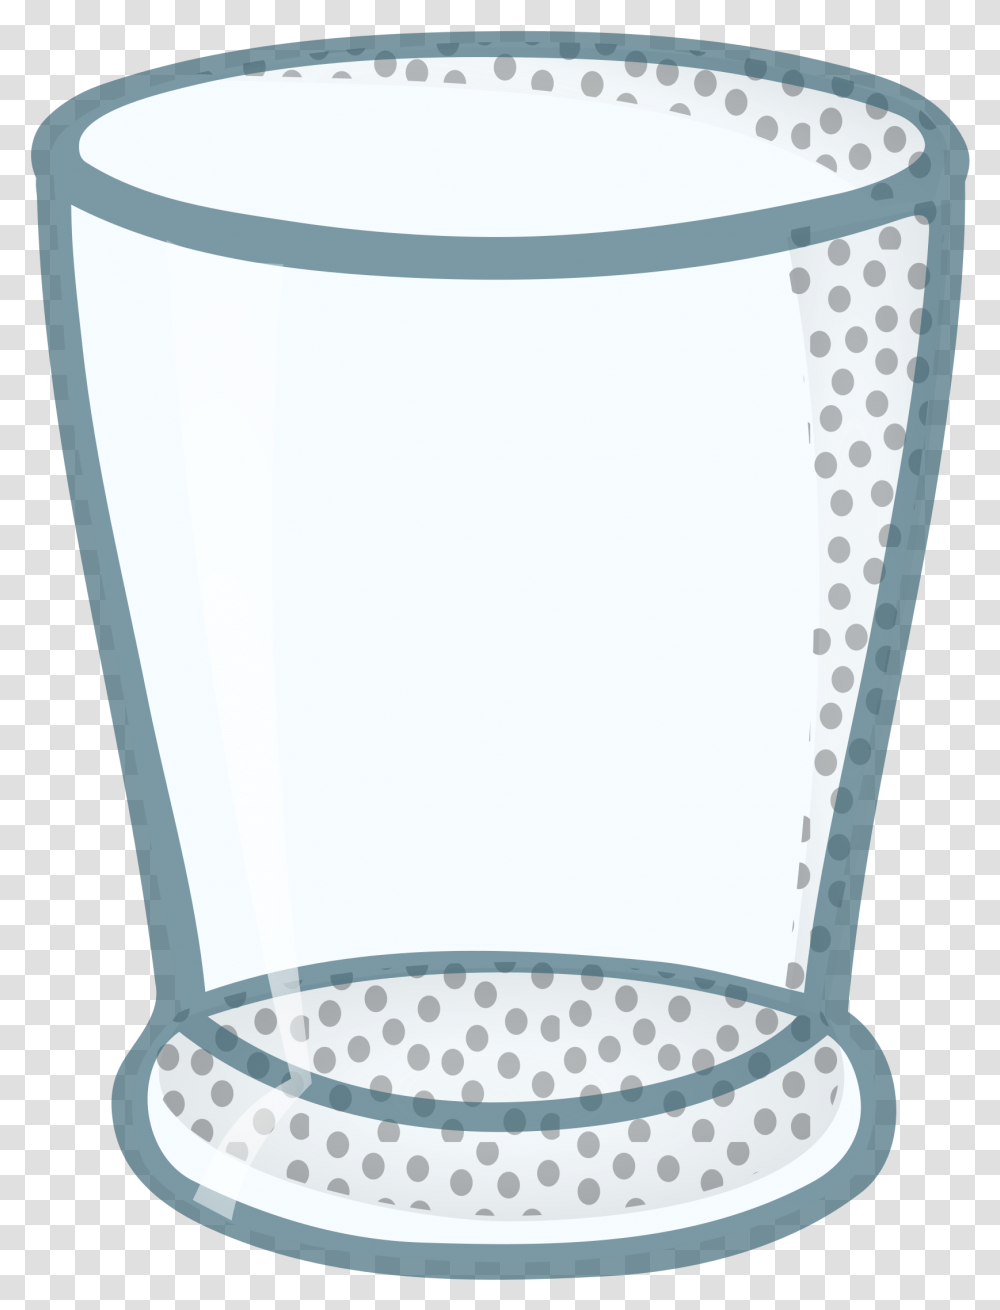 Download Glass Drinking Water Cup Free Copo De Agua Ilustracao, Beer Glass, Alcohol, Beverage, Bottle Transparent Png